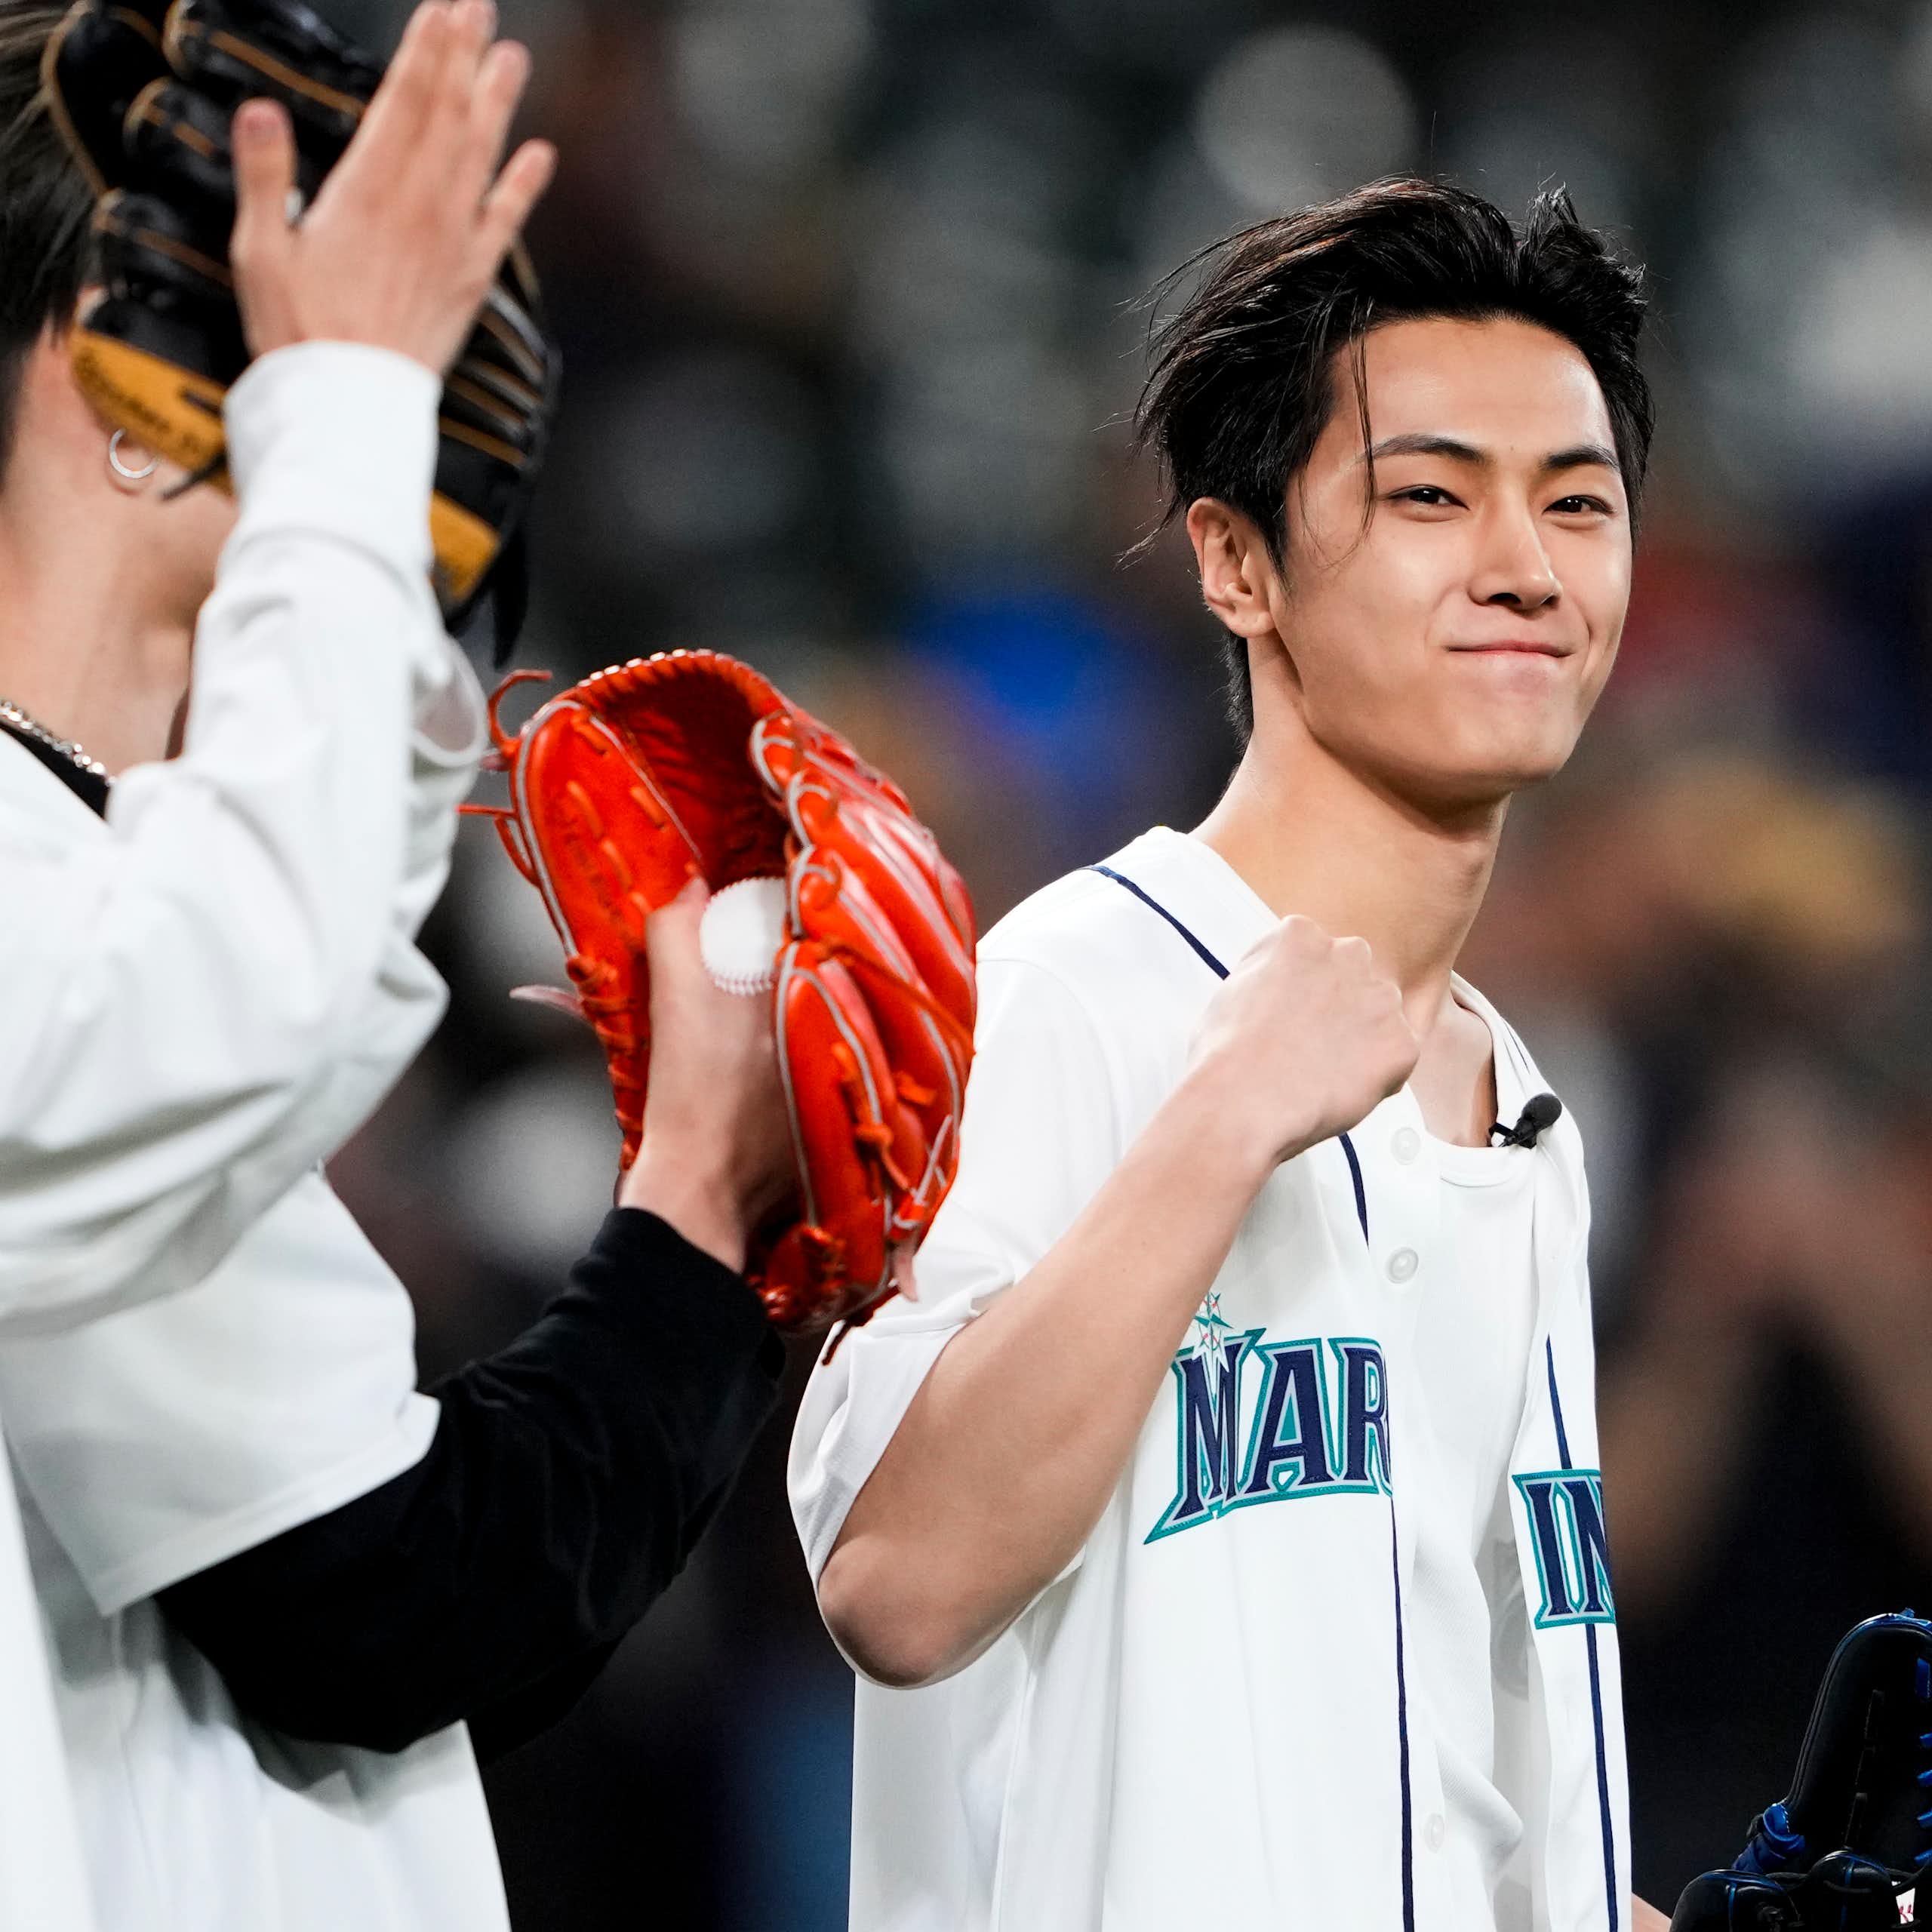 A person seen clenching a victory fist and smiling holding a baseball glove while others look on with gloves. 